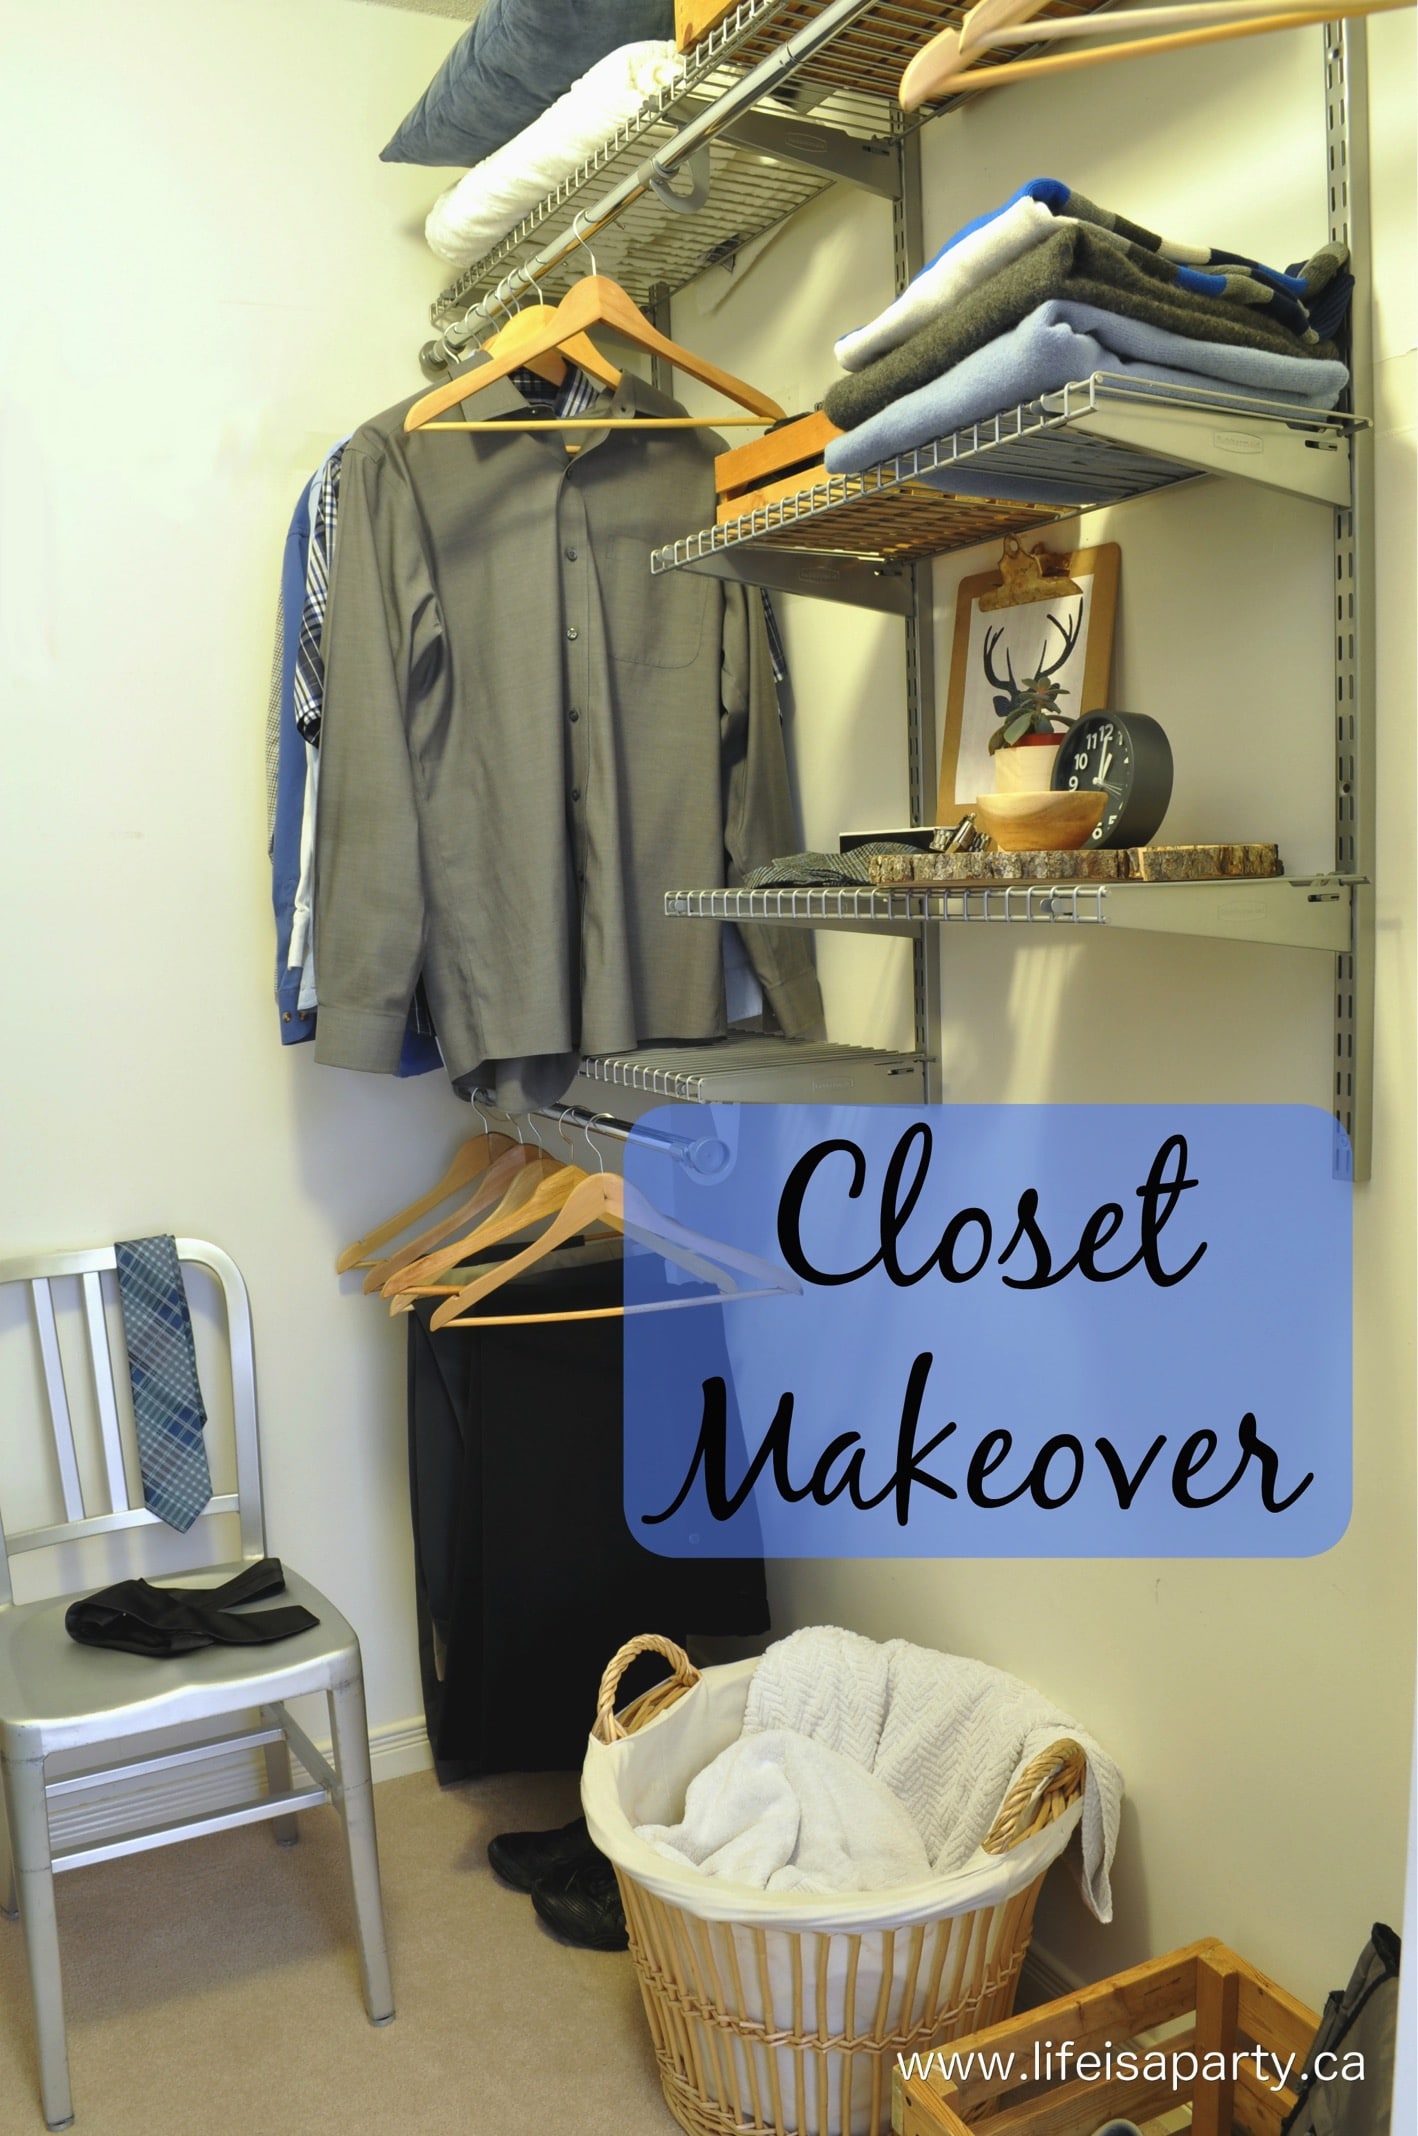 How To Organize A Walk In Closet: tips for editing, and organizing your closet so that everything has a place to live.